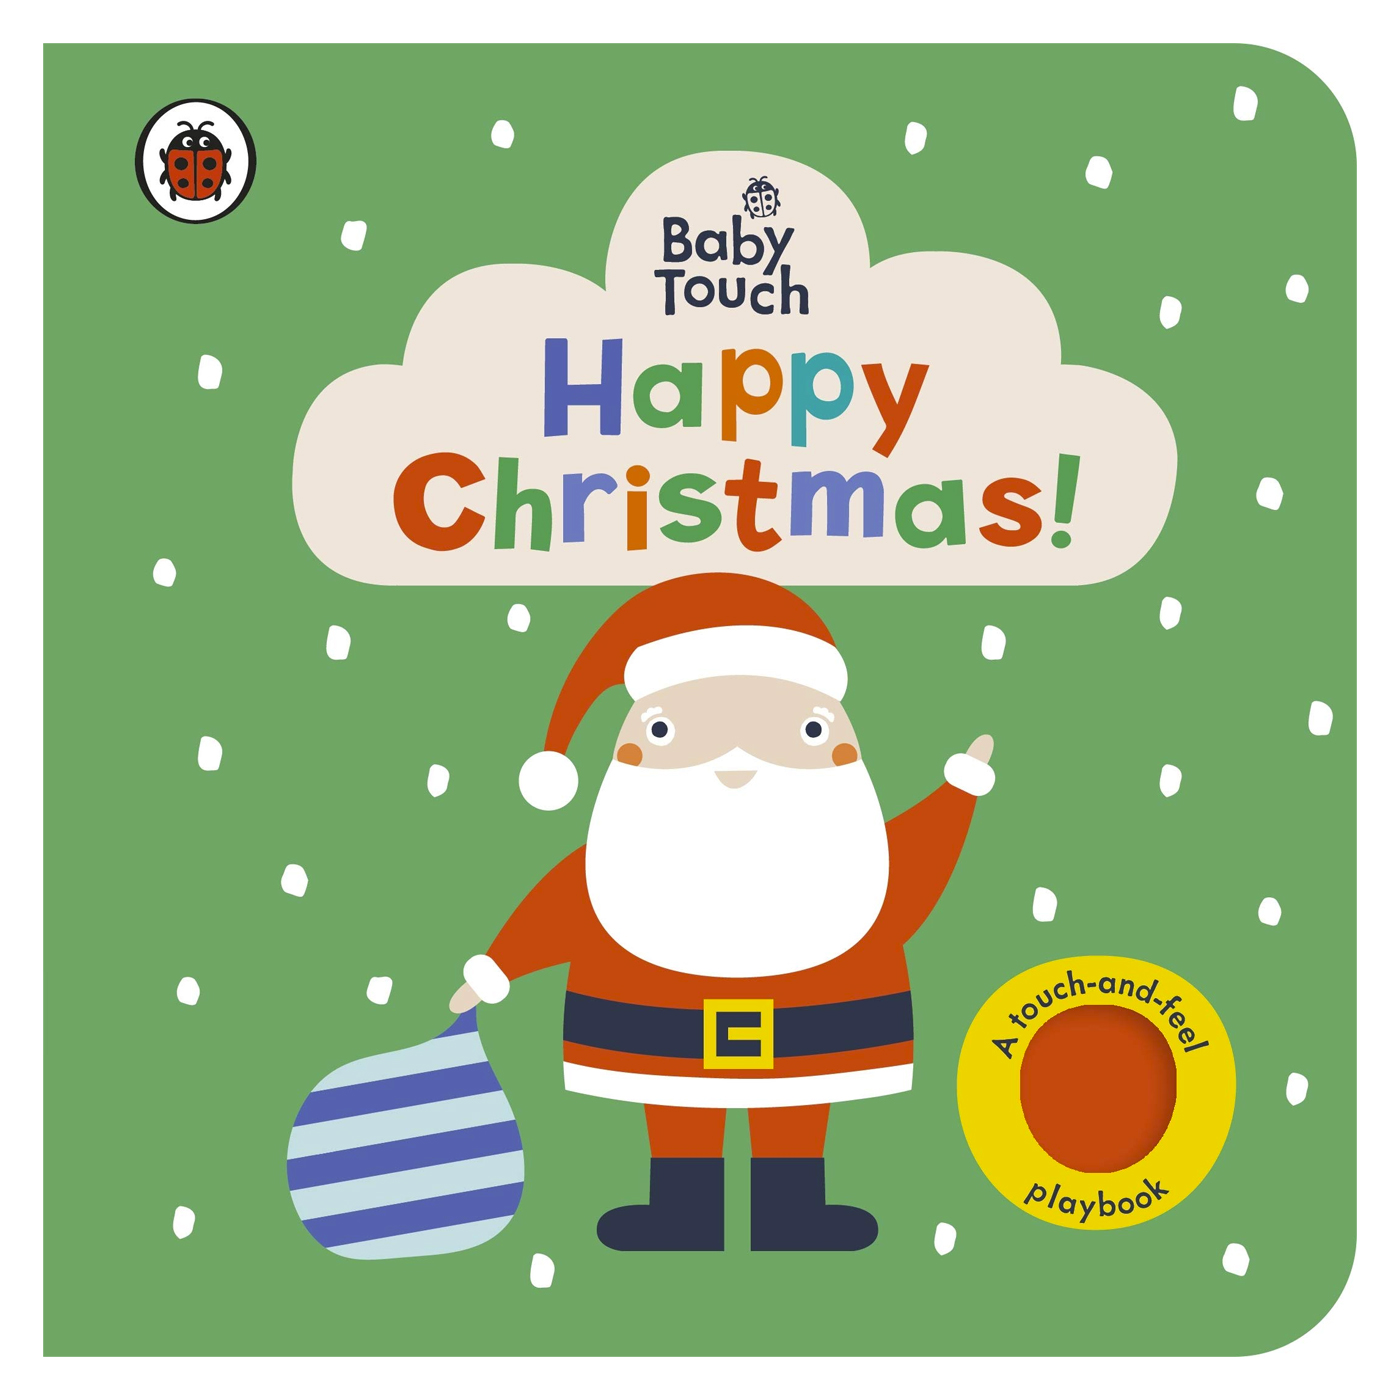  Baby Touch: Happy Christmas!